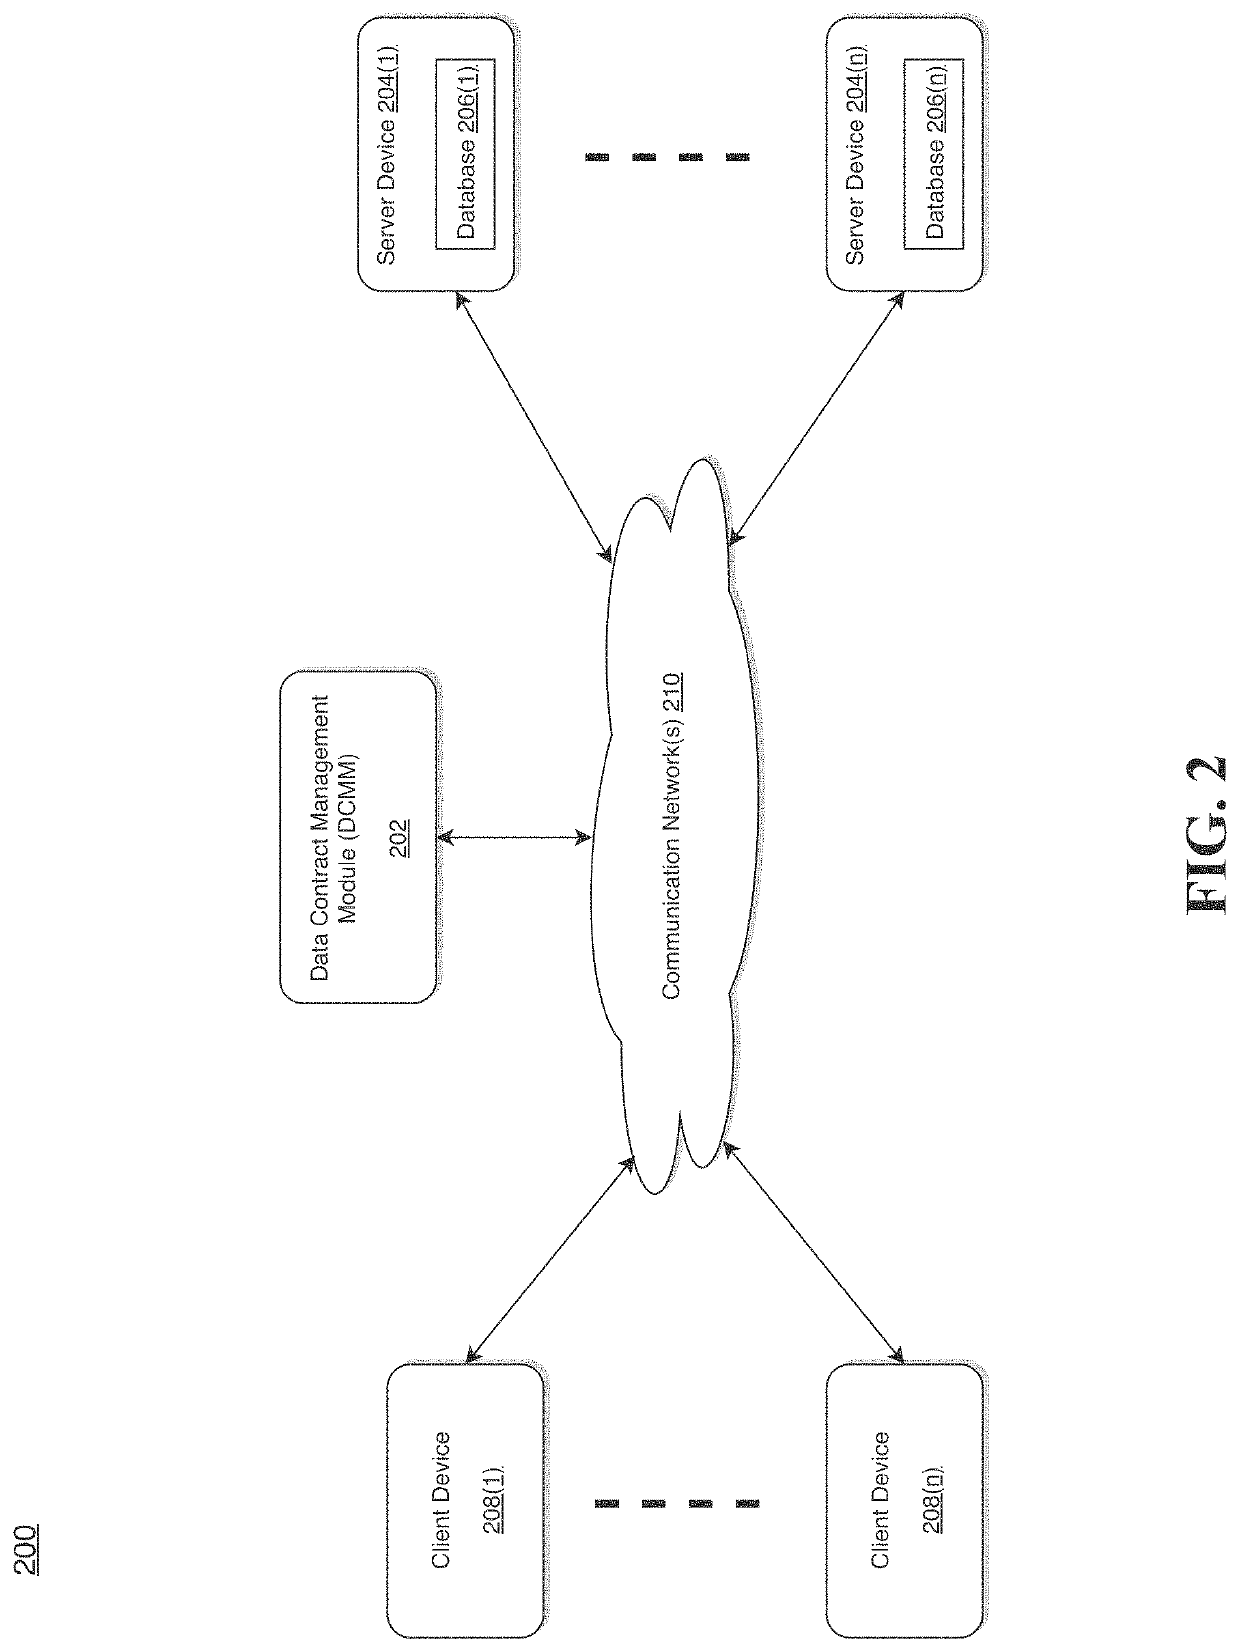 System and method for implementing a data contract management module